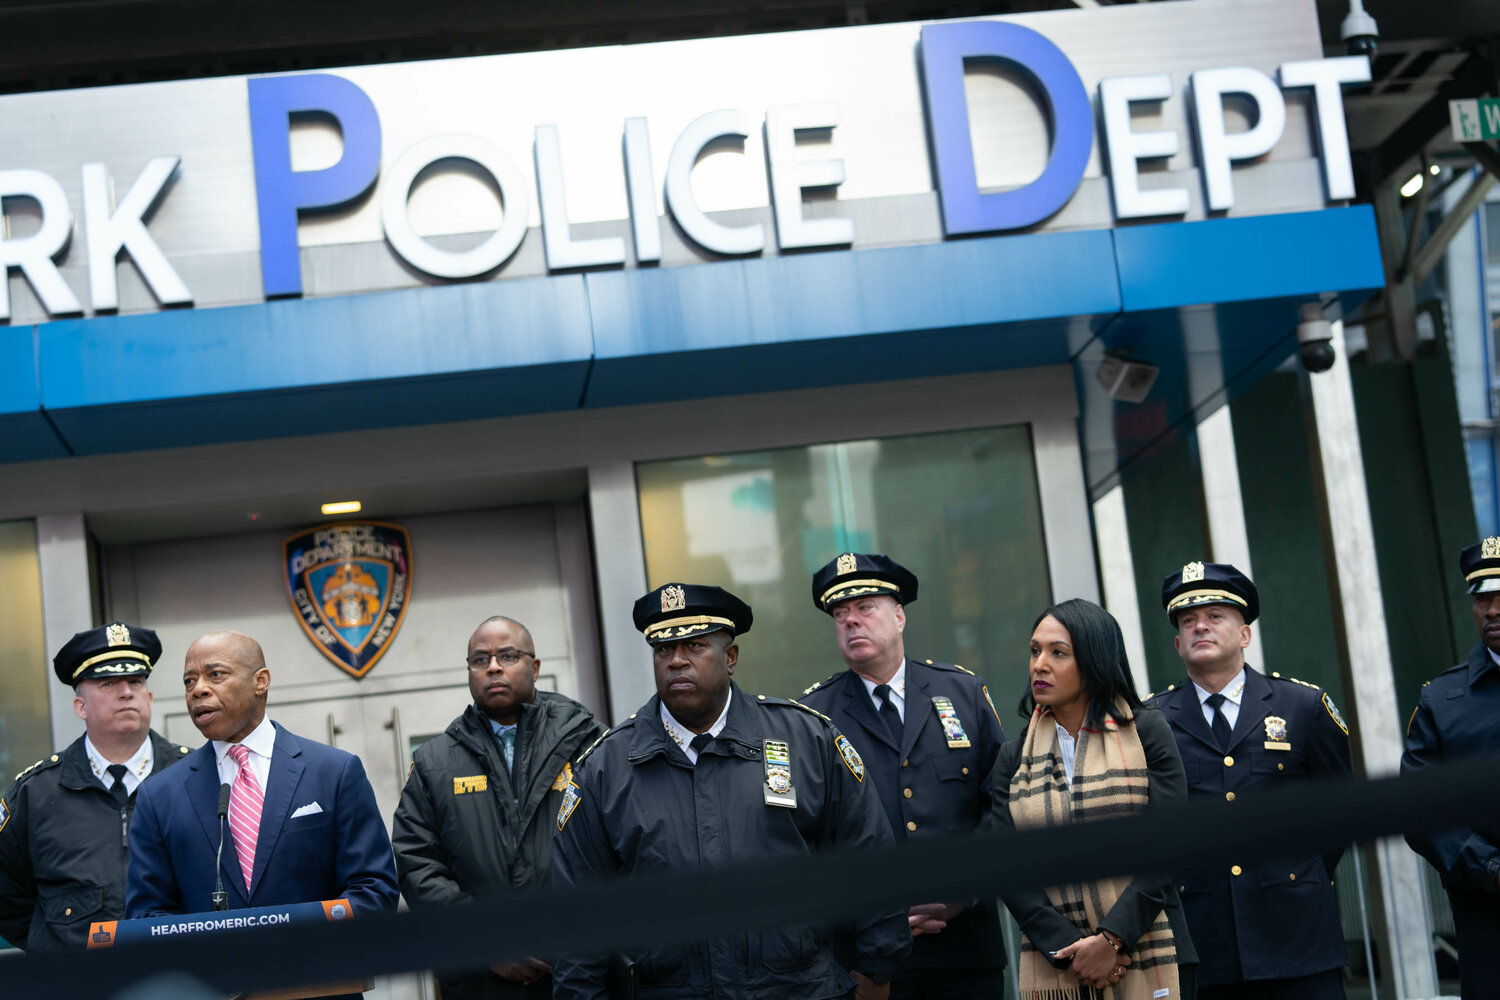 Mayor Eric Adams and NYPD officials during a public safety-related announcement ahead of New Year’s Eve at the Times Square Police Substation.